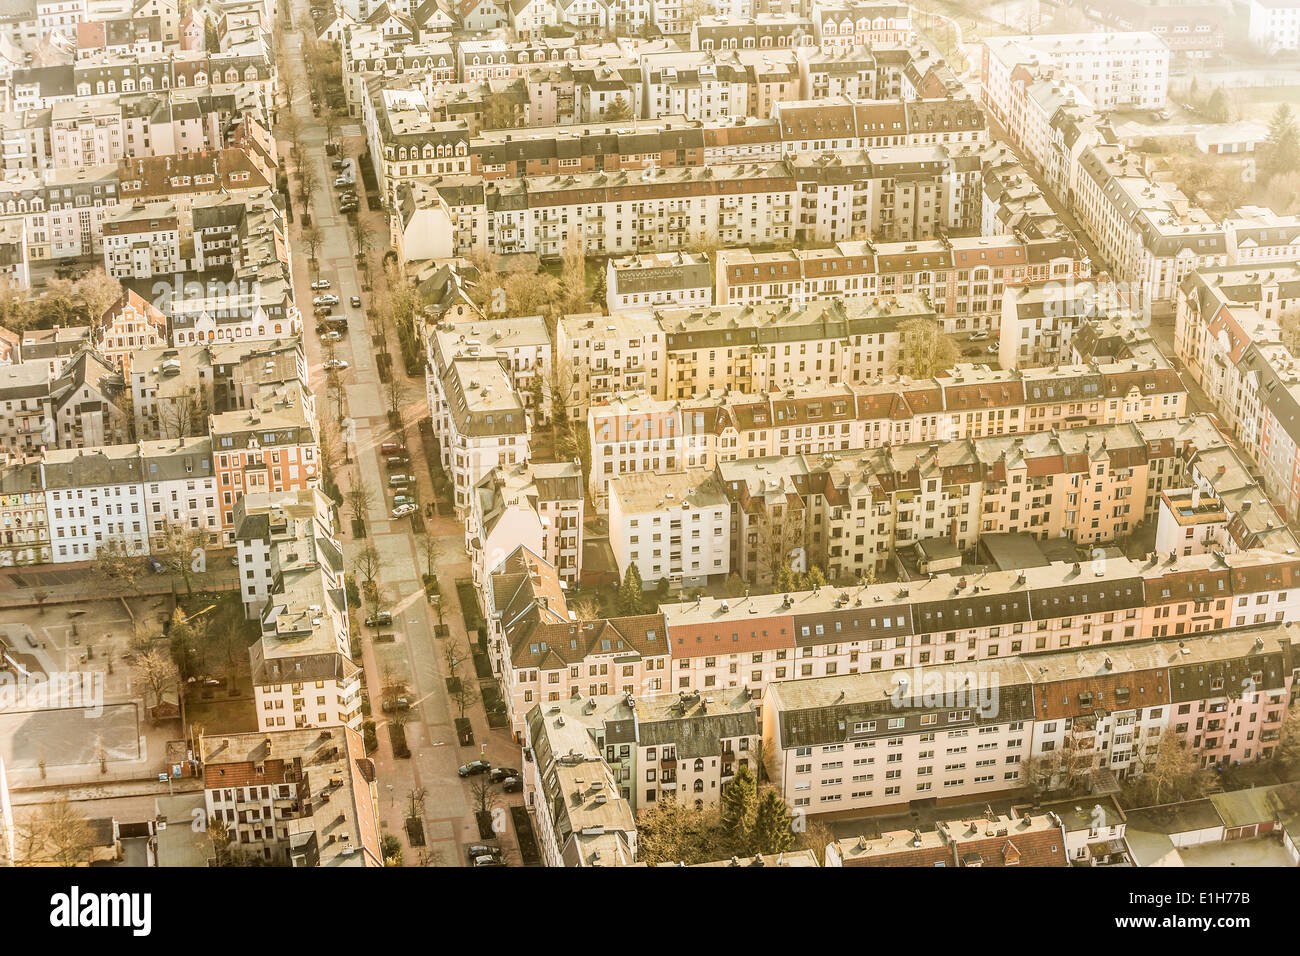 Aerial view of city apartment blocks, Bremerhaven, Bremen, Germany Stock Photo